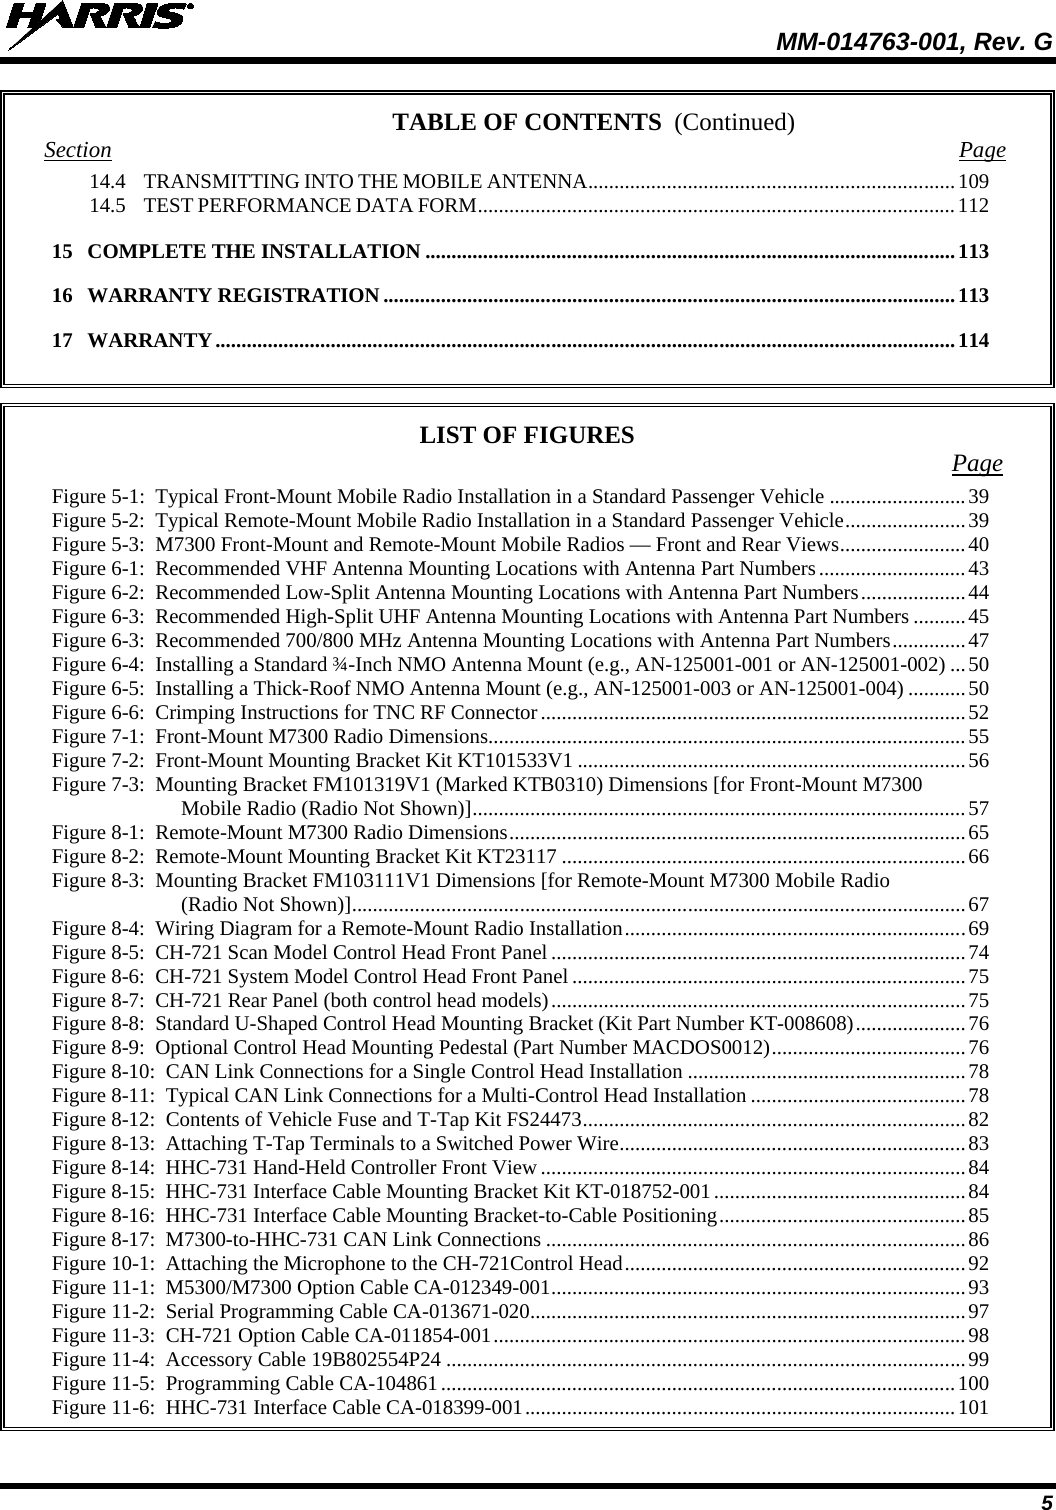  MM-014763-001, Rev. G 5 TABLE OF CONTENTS Section Page 14.4 TRANSMITTING INTO THE MOBILE ANTENNA ...................................................................... 109 14.5 TEST PERFORMANCE DATA FORM ........................................................................................... 112 15 COMPLETE THE INSTALLATION ..................................................................................................... 113 16 WARRANTY REGISTRATION ............................................................................................................. 113 17 WARRANTY ............................................................................................................................................. 114   LIST OF FIGURES Page Figure 5-1:  Typical Front-Mount Mobile Radio Installation in a Standard Passenger Vehicle .......................... 39 Figure 5-2:  Typical Remote-Mount Mobile Radio Installation in a Standard Passenger Vehicle ....................... 39 Figure 5-3:  M7300 Front-Mount and Remote-Mount Mobile Radios — Front and Rear Views ........................ 40 Figure 6-1:  Recommended VHF Antenna Mounting Locations with Antenna Part Numbers ............................ 43 Figure 6-2:  Recommended Low-Split Antenna Mounting Locations with Antenna Part Numbers .................... 44 Figure 6-3:  Recommended High-Split UHF Antenna Mounting Locations with Antenna Part Numbers .......... 45 Figure 6-3:  Recommended 700/800 MHz Antenna Mounting Locations with Antenna Part Numbers .............. 47 Figure 6-4:  Installing a Standard ¾-Inch NMO Antenna Mount (e.g., AN-125001-001 or AN-125001-002) ... 50 Figure 6-5:  Installing a Thick-Roof NMO Antenna Mount (e.g., AN-125001-003 or AN-125001-004) ........... 50 Figure 6-6:  Crimping Instructions for TNC RF Connector ................................................................................. 52 Figure 7-1:  Front-Mount M7300 Radio Dimensions ........................................................................................... 55 Figure 7-2:  Front-Mount Mounting Bracket Kit KT101533V1 .......................................................................... 56 Figure 7-3:  Mounting Bracket FM101319V1 (Marked KTB0310) Dimensions [for Front-Mount M7300 Mobile Radio (Radio Not Shown)] .............................................................................................. 57 Figure 8-1:  Remote-Mount M7300 Radio Dimensions ....................................................................................... 65 Figure 8-2:  Remote-Mount Mounting Bracket Kit KT23117 ............................................................................. 66 Figure 8-3:  Mounting Bracket FM103111V1 Dimensions [for Remote-Mount M7300 Mobile Radio (Radio Not Shown)] ..................................................................................................................... 67 Figure 8-4:  Wiring Diagram for a Remote-Mount Radio Installation ................................................................. 69 Figure 8-5:  CH-721 Scan Model Control Head Front Panel ............................................................................... 74 Figure 8-6:  CH-721 System Model Control Head Front Panel ........................................................................... 75 Figure 8-7:  CH-721 Rear Panel (both control head models) ............................................................................... 75 Figure 8-8:  Standard U-Shaped Control Head Mounting Bracket (Kit Part Number KT-008608) ..................... 76 Figure 8-9:  Optional Control Head Mounting Pedestal (Part Number MACDOS0012) ..................................... 76 Figure 8-10:  CAN Link Connections for a Single Control Head Installation ..................................................... 78 Figure 8-11:  Typical CAN Link Connections for a Multi-Control Head Installation ......................................... 78 Figure 8-12:  Contents of Vehicle Fuse and T-Tap Kit FS24473 ......................................................................... 82 Figure 8-13:  Attaching T-Tap Terminals to a Switched Power Wire .................................................................. 83 Figure 8-14:  HHC-731 Hand-Held Controller Front View ................................................................................. 84 Figure 8-15:  HHC-731 Interface Cable Mounting Bracket Kit KT-018752-001 ................................................ 84 Figure 8-16:  HHC-731 Interface Cable Mounting Bracket-to-Cable Positioning ............................................... 85 Figure 8-17:  M7300-to-HHC-731 CAN Link Connections ................................................................................ 86 Figure 10-1:  Attaching the Microphone to the CH-721Control Head ................................................................. 92 Figure 11-1:  M5300/M7300 Option Cable CA-012349-001 ............................................................................... 93 Figure 11-2:  Serial Programming Cable CA-013671-020 ................................................................................... 97 Figure 11-3:  CH-721 Option Cable CA-011854-001 .......................................................................................... 98 Figure 11-4:  Accessory Cable 19B802554P24 ................................................................................................... 99 Figure 11-5:  Programming Cable CA-104861 .................................................................................................. 100 Figure 11-6:  HHC-731 Interface Cable CA-018399-001 .................................................................................. 101 (Continued) 